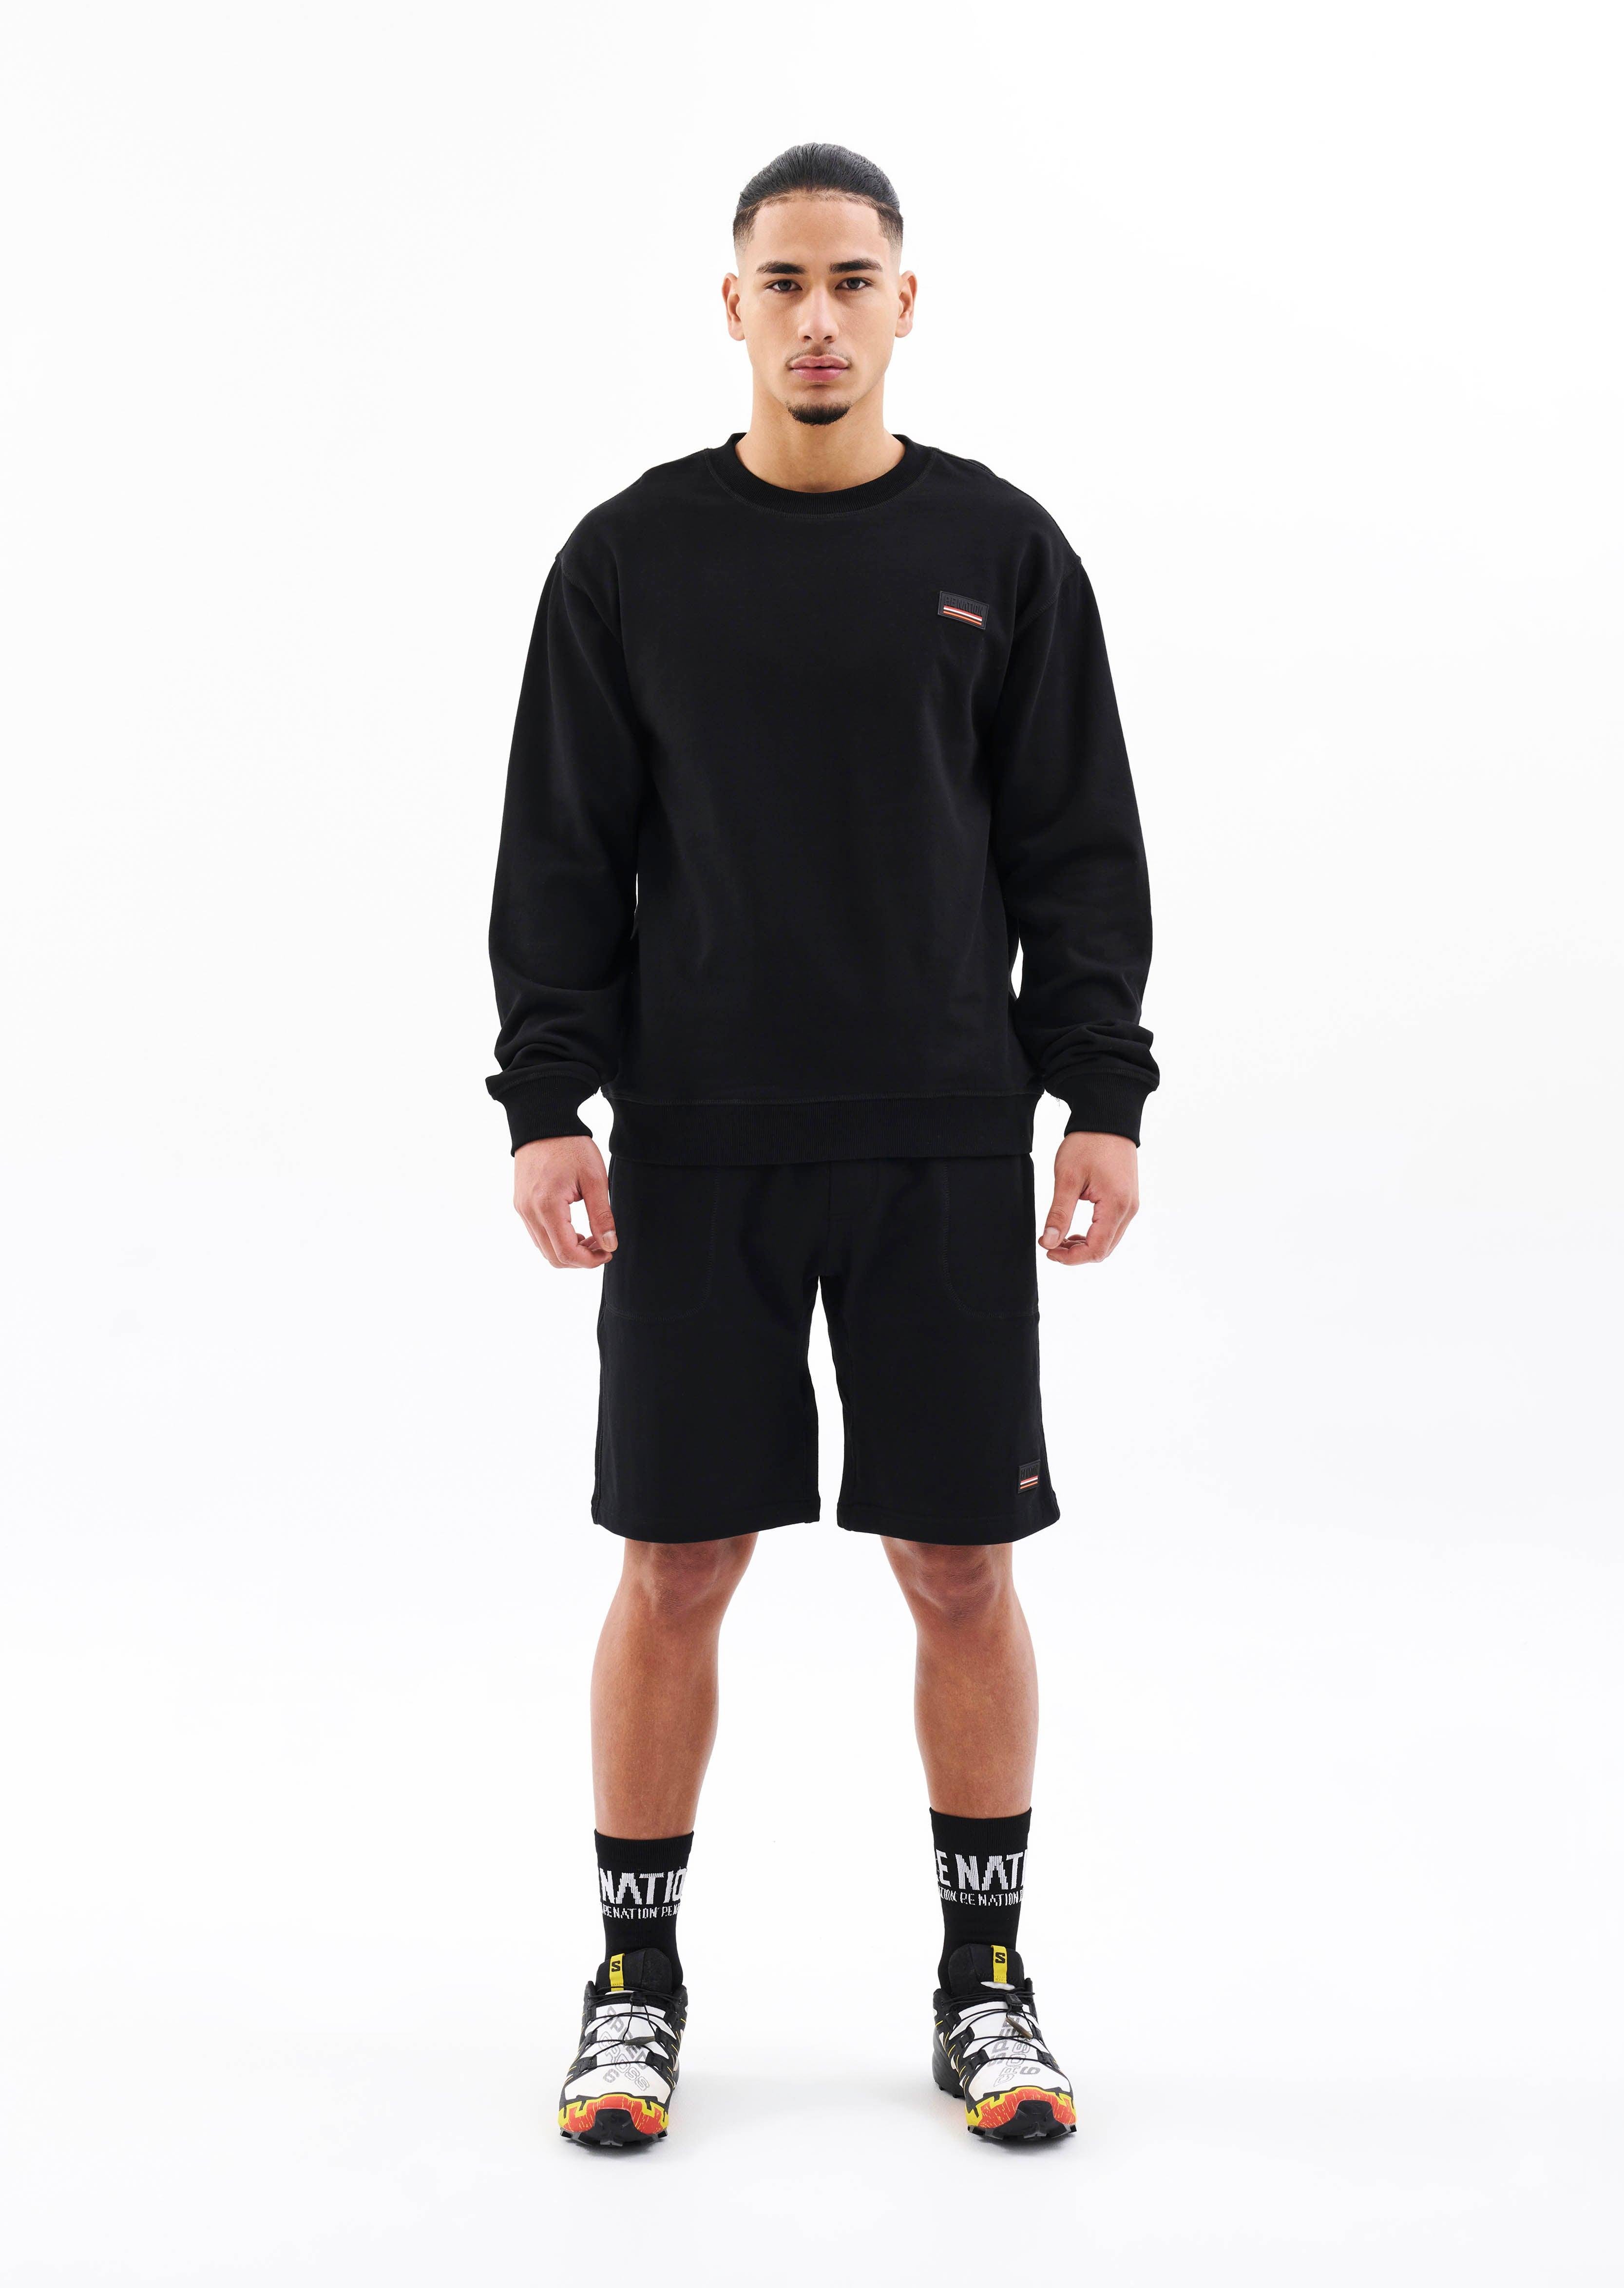 FORTITUDE SWEAT IN BLACK by P.E NATION